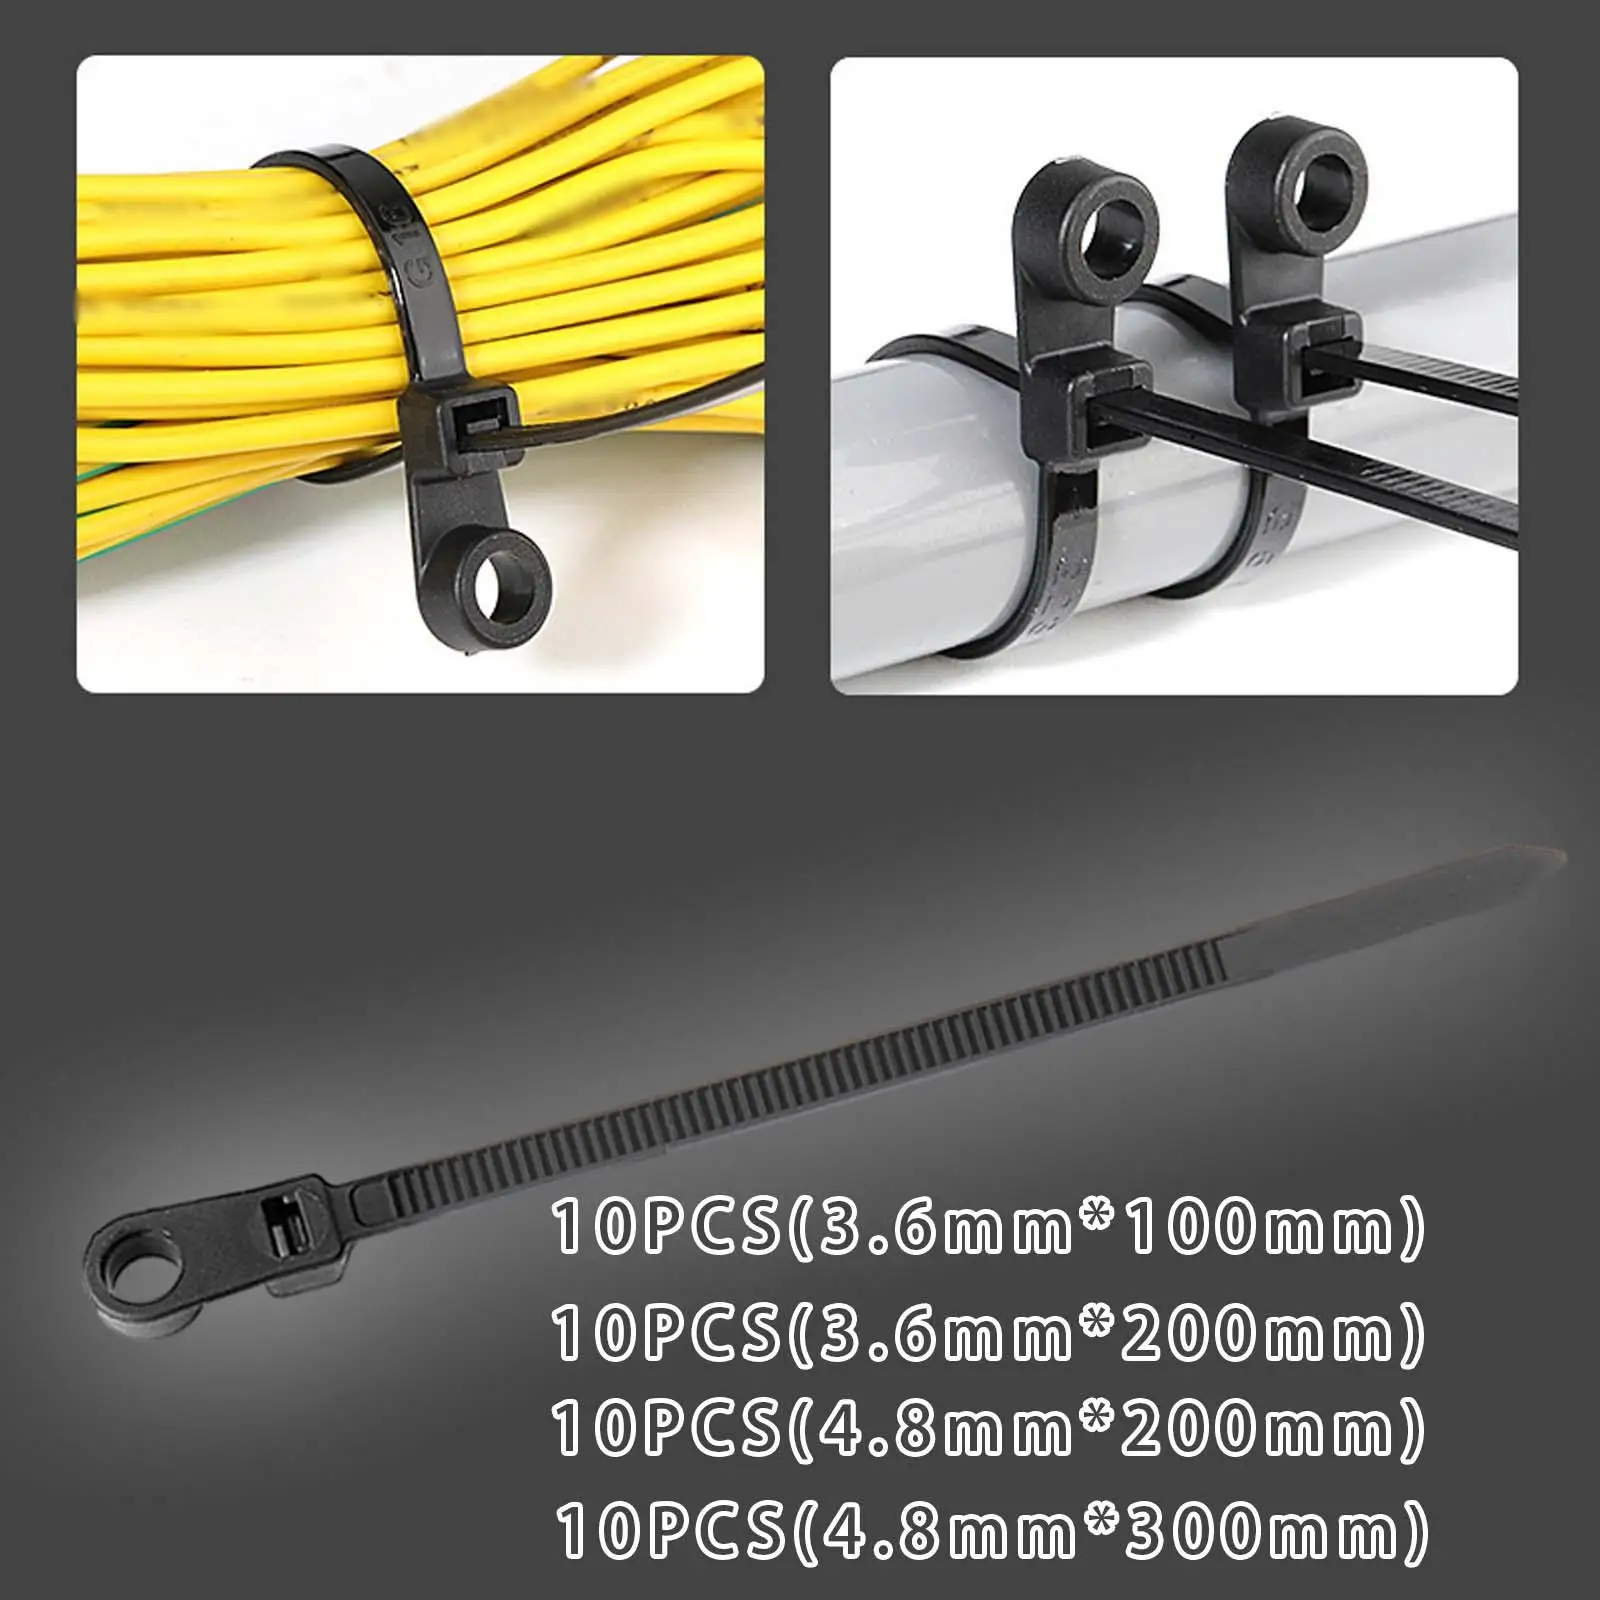 10x Cable Zips Wire Tie Wraps Bundle Strap with Screw Hole Mount for Office Cable and Wire Assembly Garage Garden Home